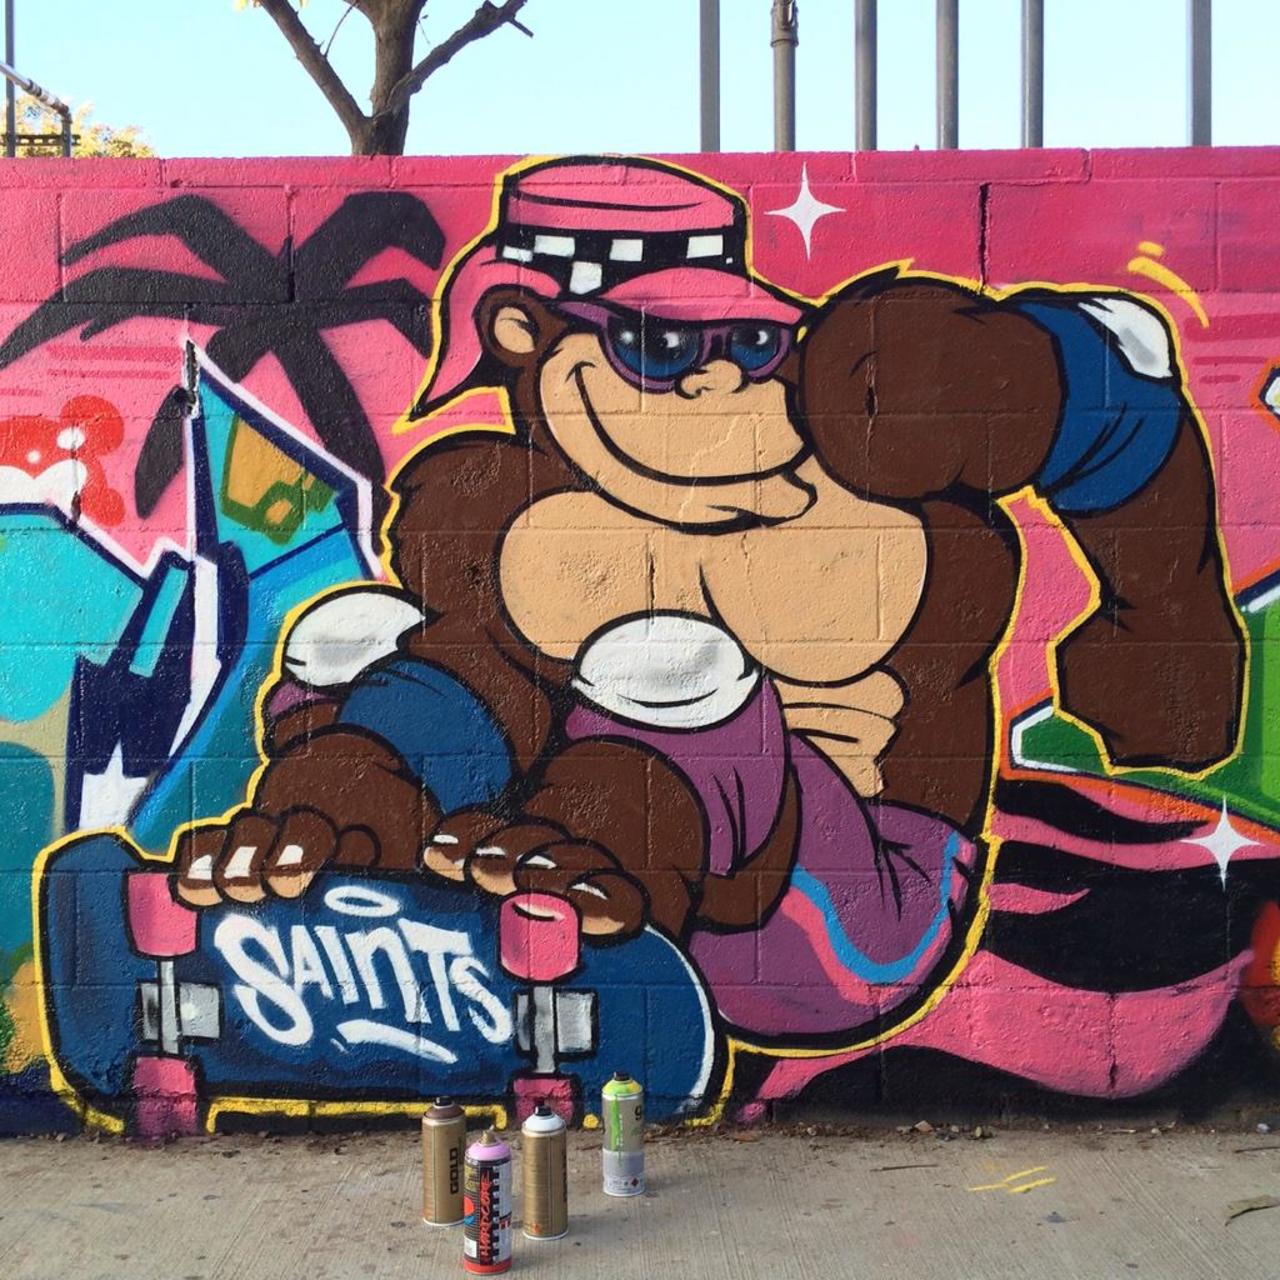 Town & Country #surf #skate #design #spraypaint production in #SantaMonica  #graffiti #art #character #townandcountry http://t.co/gSGkrKgSYW